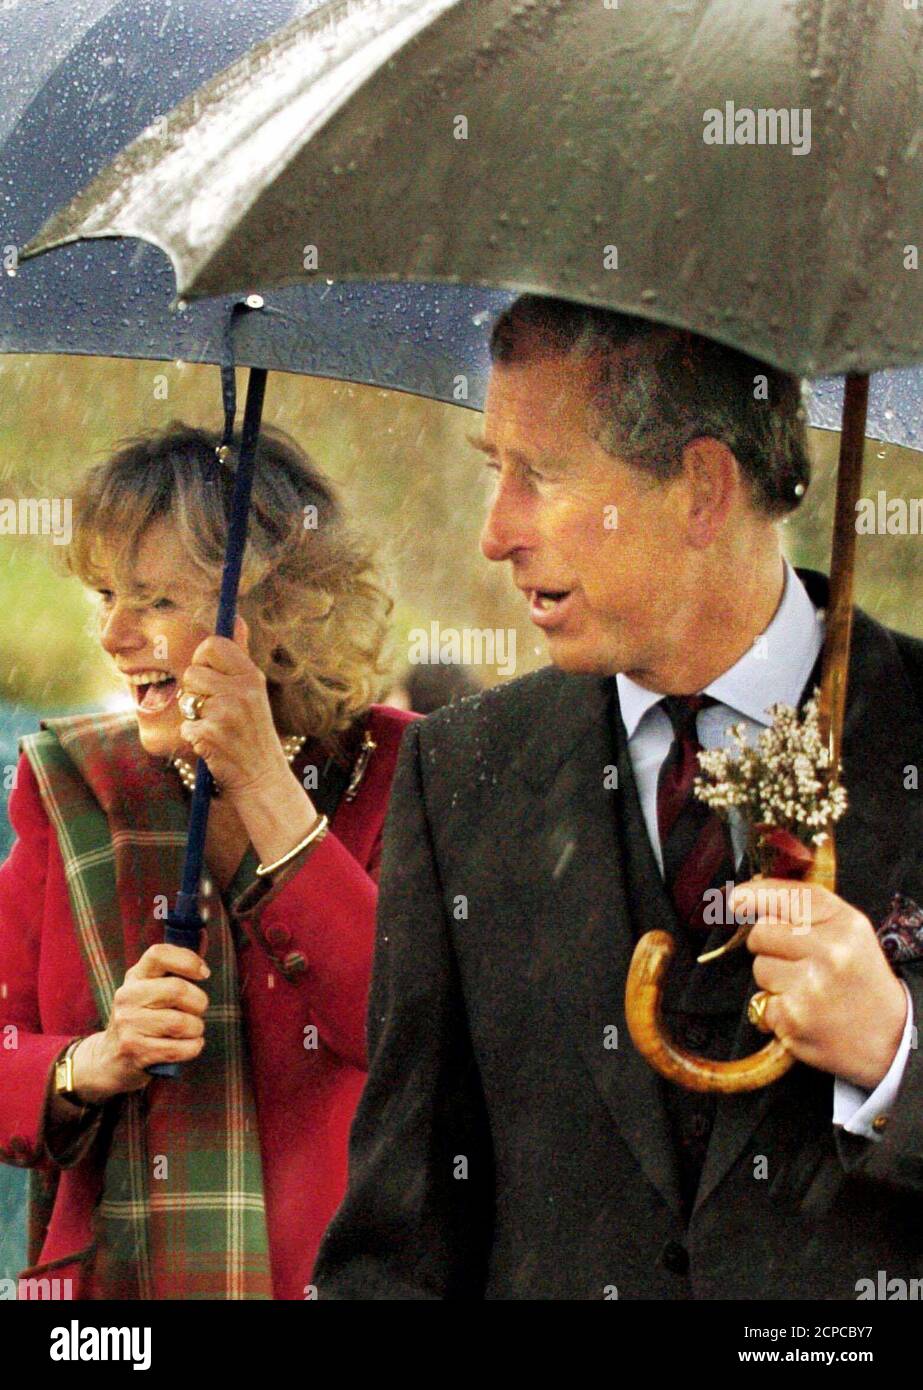 Prince Charles and his new wife, Camilla Parker Bowles, shelter from the rain after opening a new play park in Ballater.  Prince Charles and his new wife, Camilla Parker Bowles, shelter from the rain after opening a new play park in Ballater April14, 2005. Prince Charles and Camilla broke off from their honeymoon on Thursday for their first married engagement together. REUTERS/David Ceskin/Pool Stock Photo